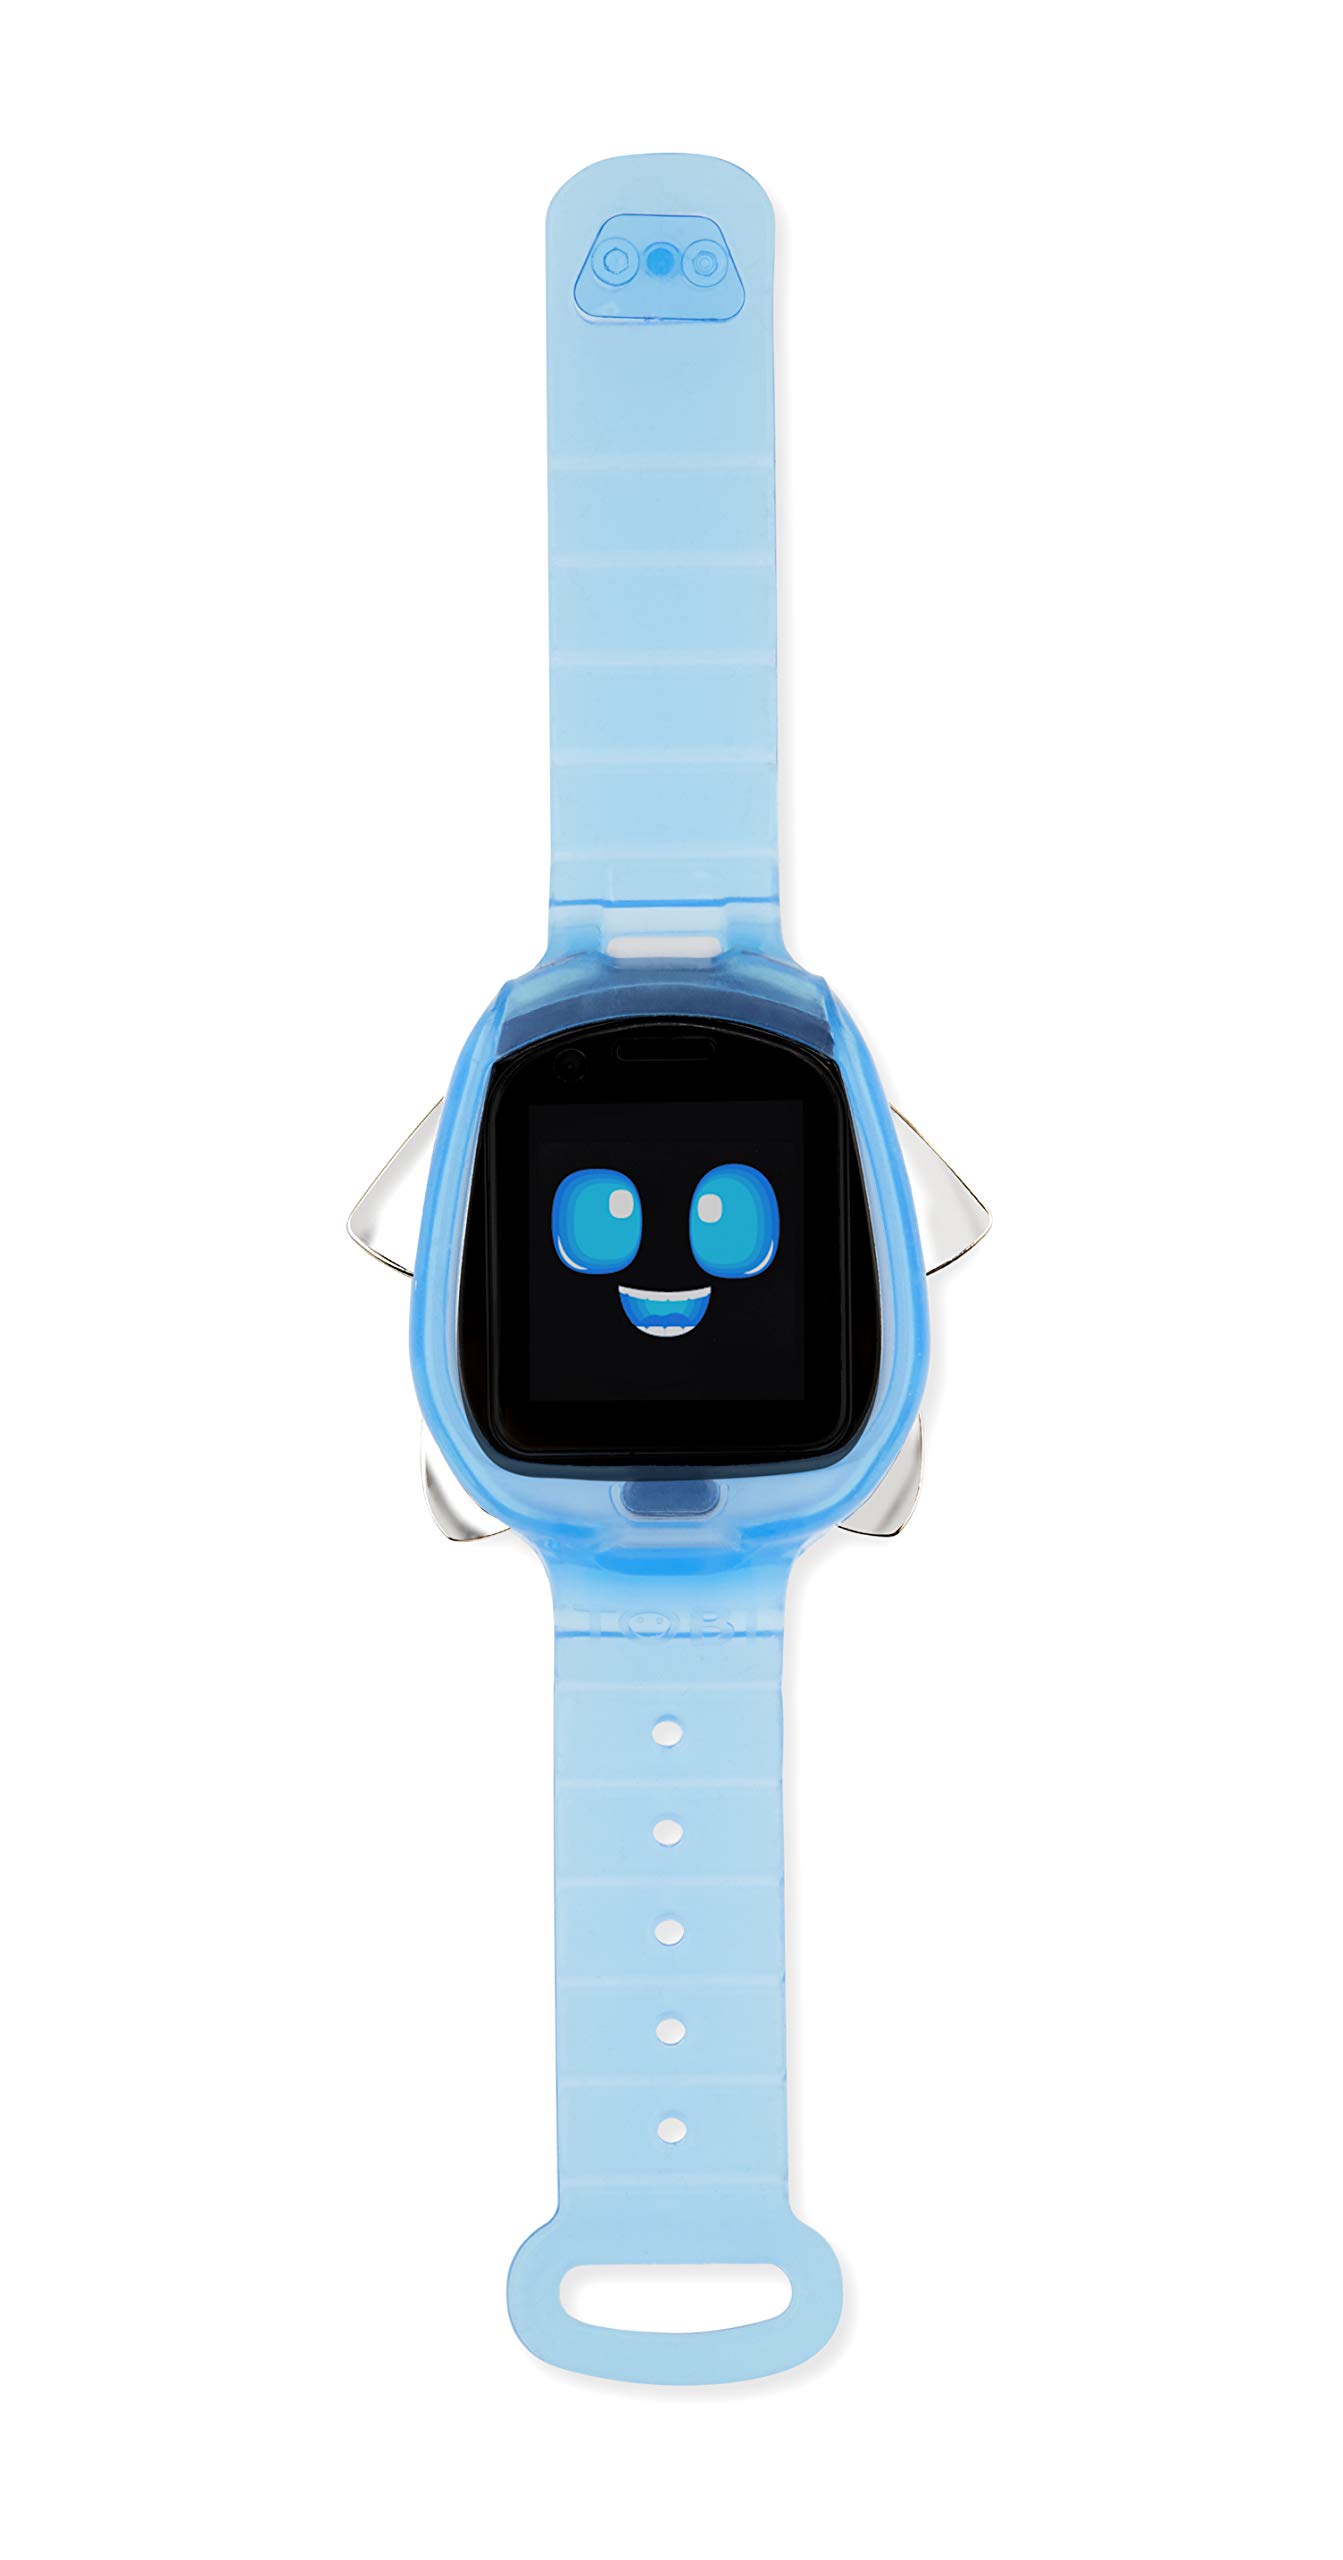 $11.67: Little Tikes Tobi Robot Smartwatch w/ Built-In Camera for Photo/Video